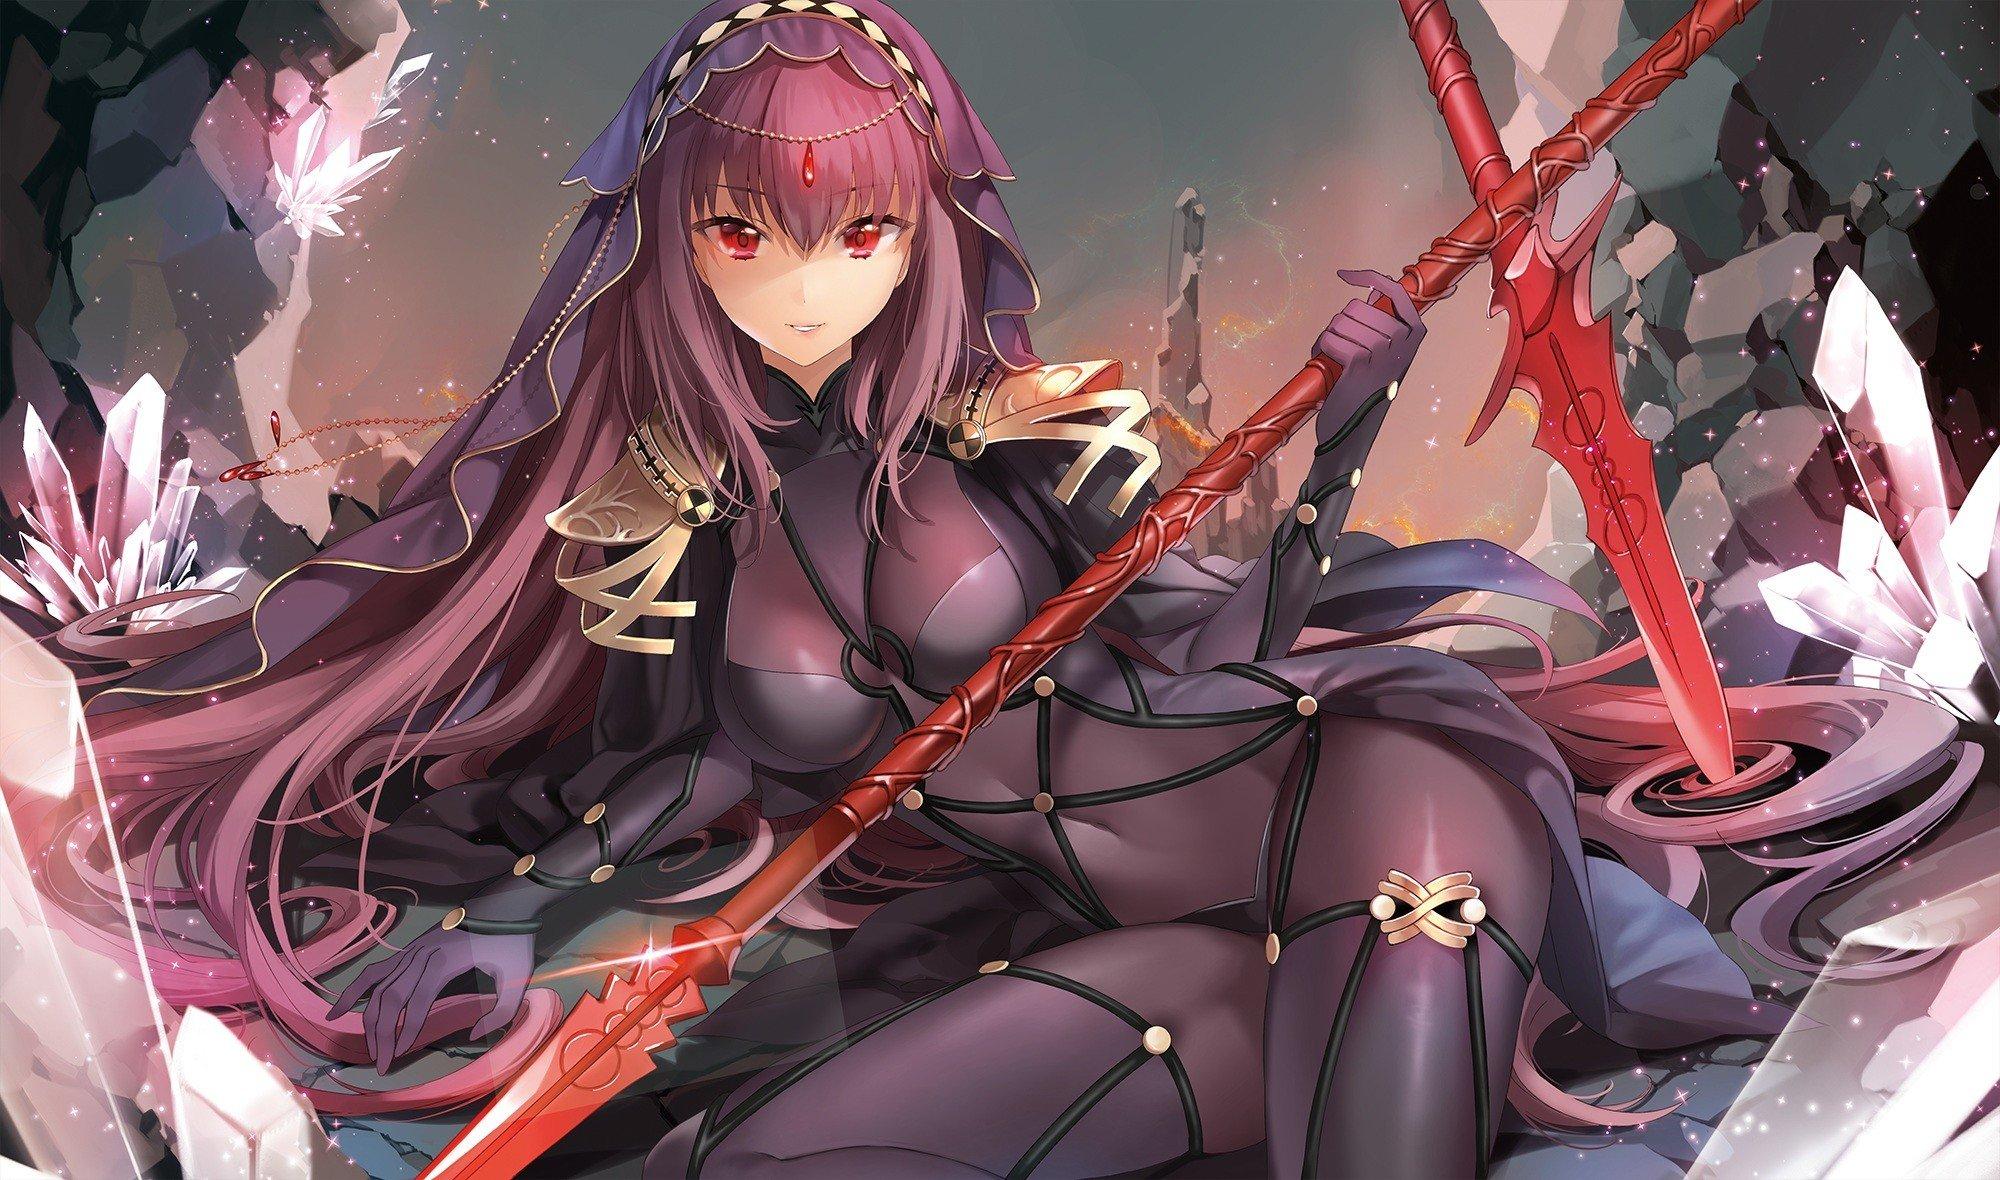 long hair, Red eyes, Anime, Anime girls, Fate Grand Order, Scathach